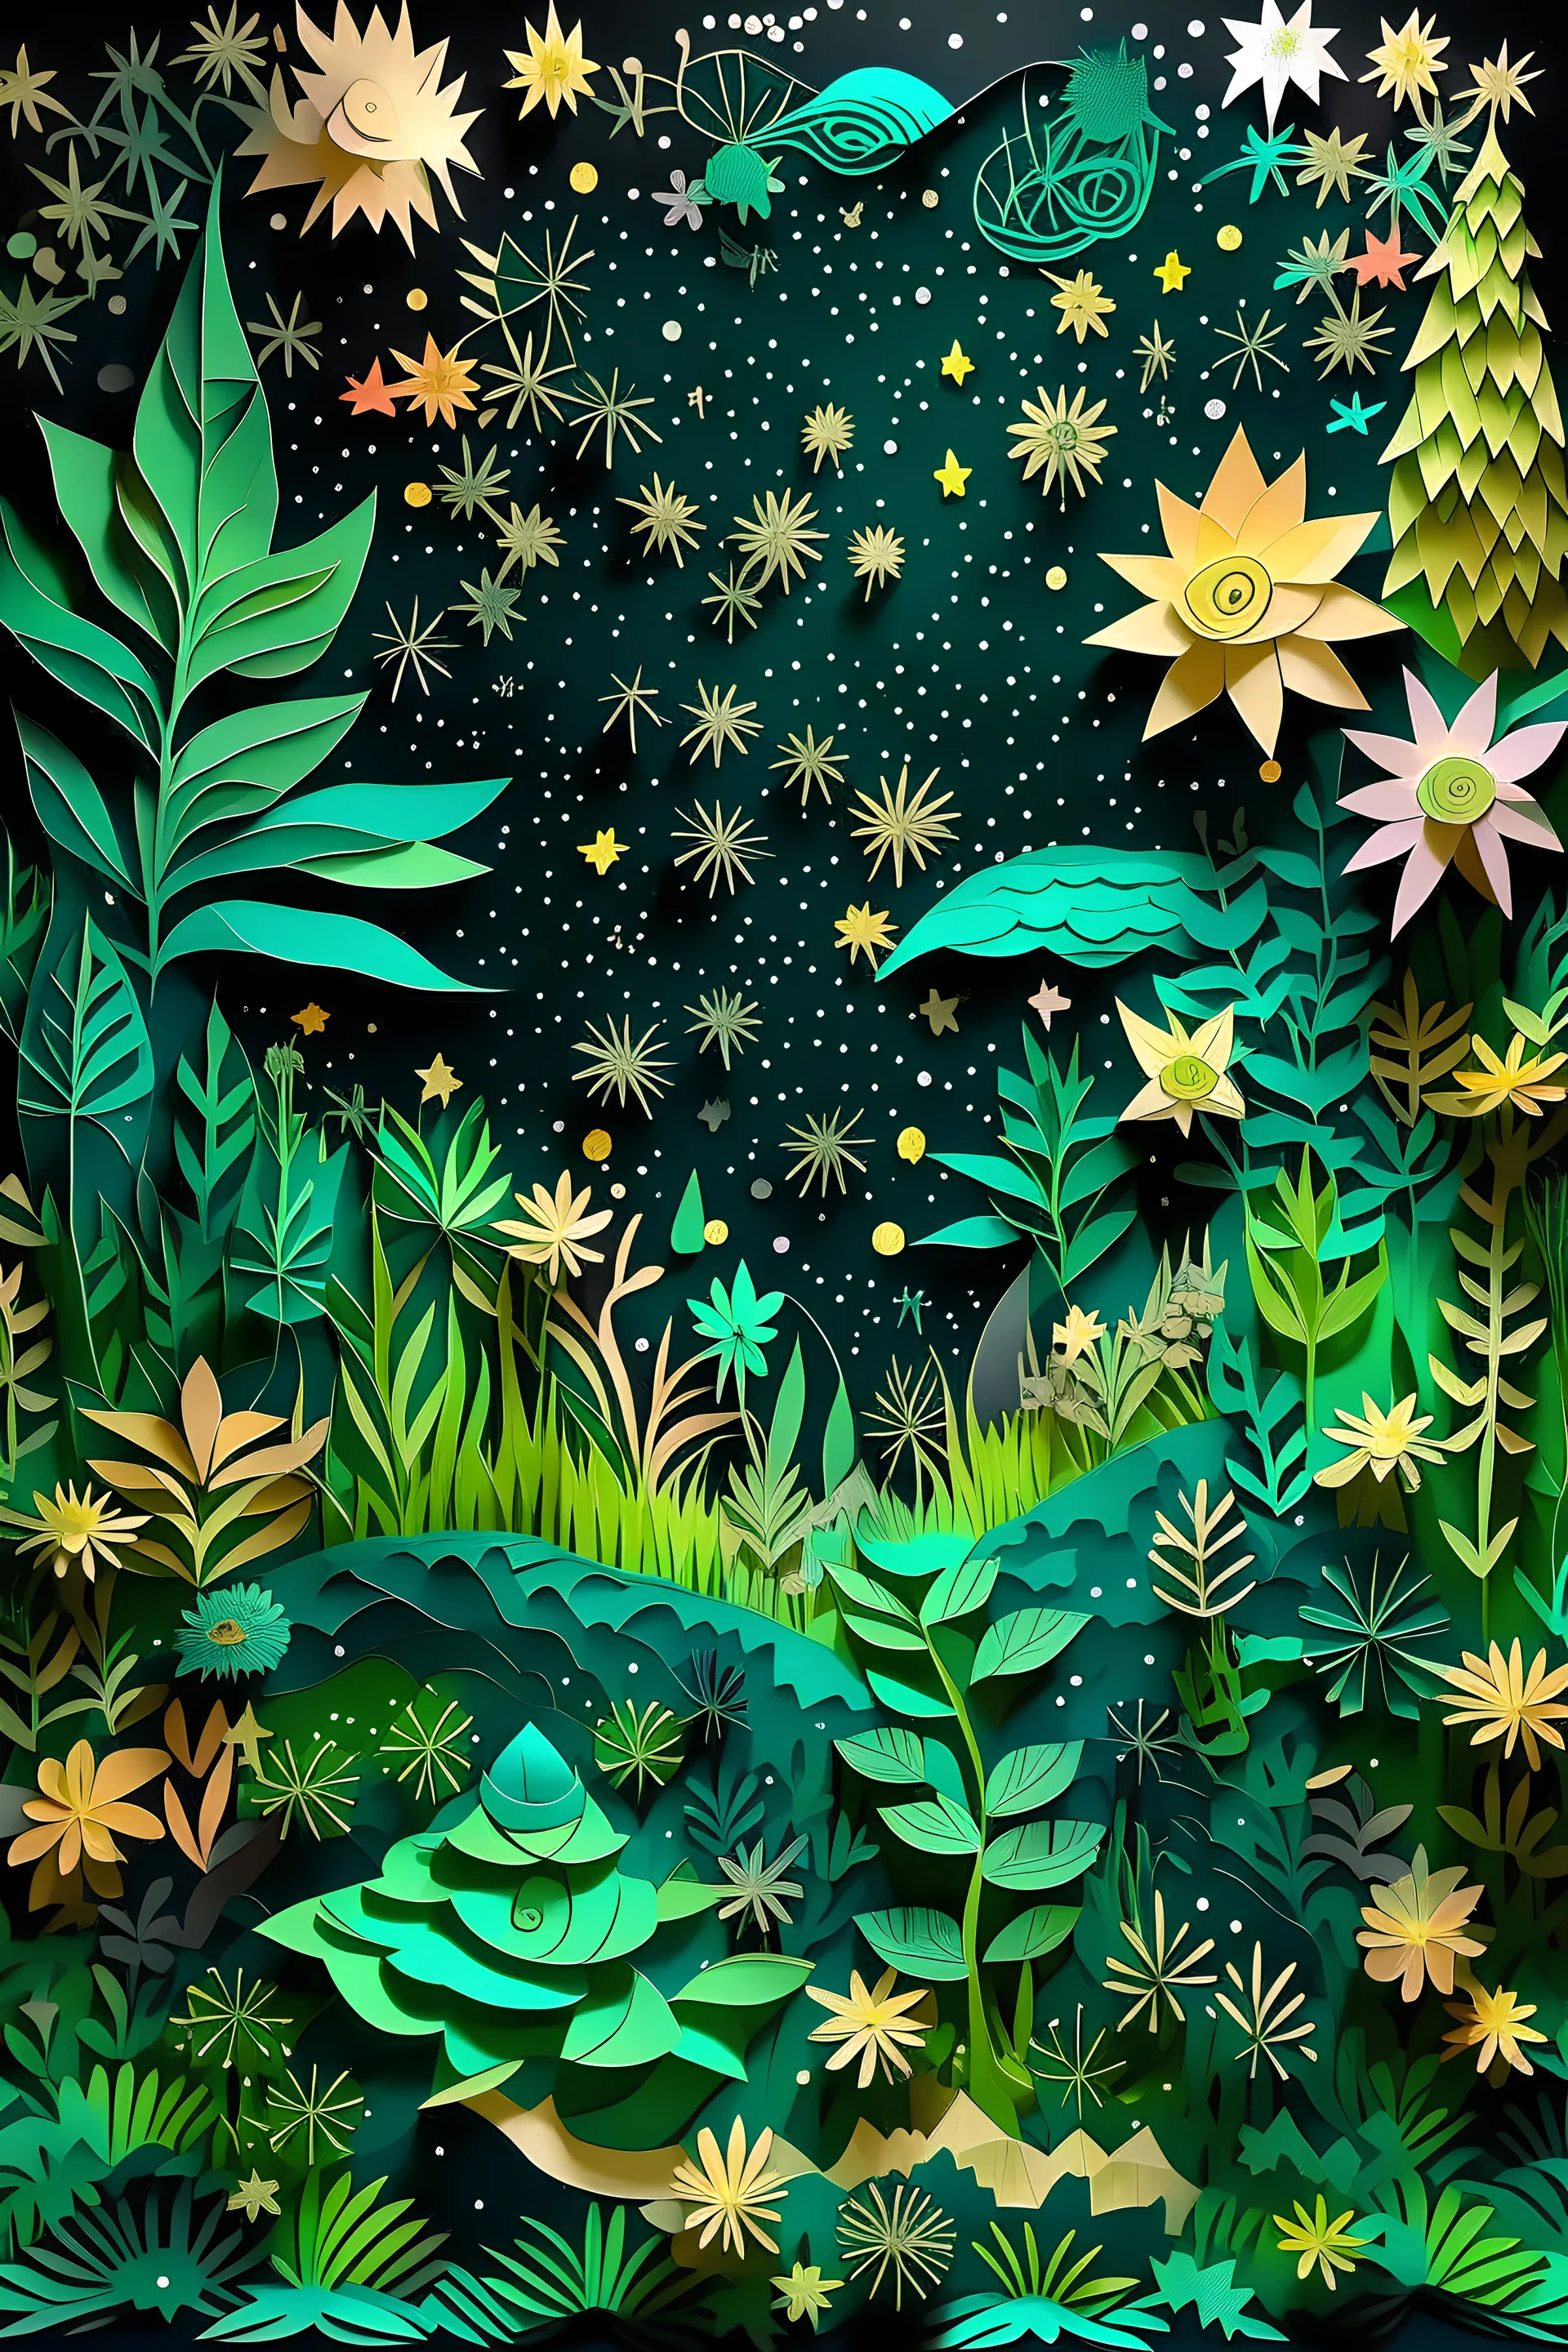 BIG GrEEN PLant taking up most of the space in the picture, with Large Leaves in the center of the picture, under the night sky, with wildflowers and plants around, clouds multi-dimensional paper cut craft, paper illustration, cut out stars and glitter.